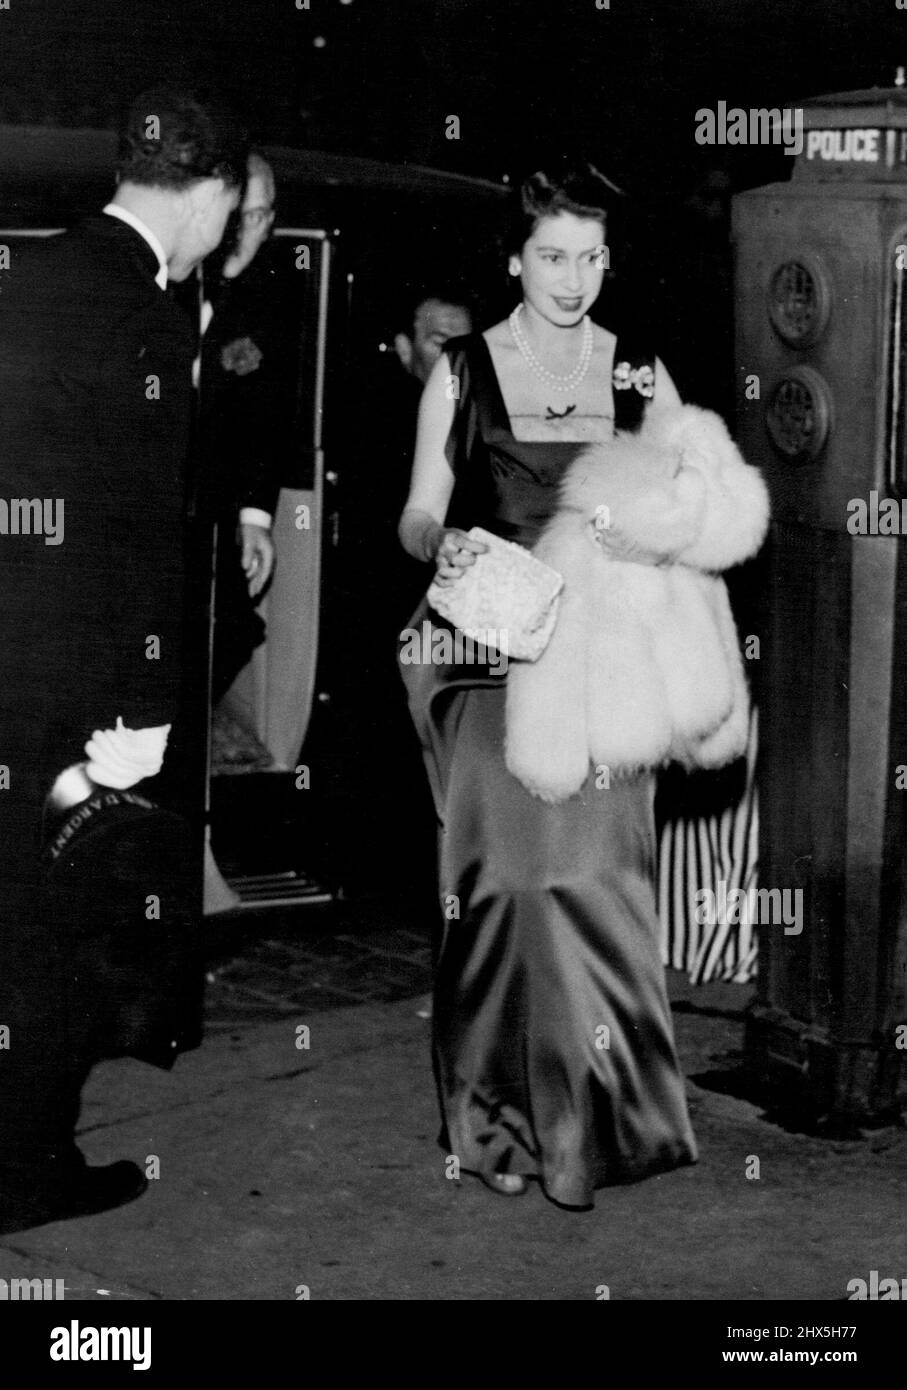 Princess Goes To Embassy Restaurant Party. Princess Elisabeth, wearing black and silver evening gown with white furs and bag to match, arriving at the Tour d'Argent Restaurant overlooking the back of Notre Dame Cathedral and the Seine, for a dinner party. Three-quarters of the accommodation was reserved by the British Embassy. Before dining in the place of honour on the sixth floor, the Princess and the Duke of Edinburgh went down to the ancient cellars for aperitifs. May 18, 1948. Stock Photo